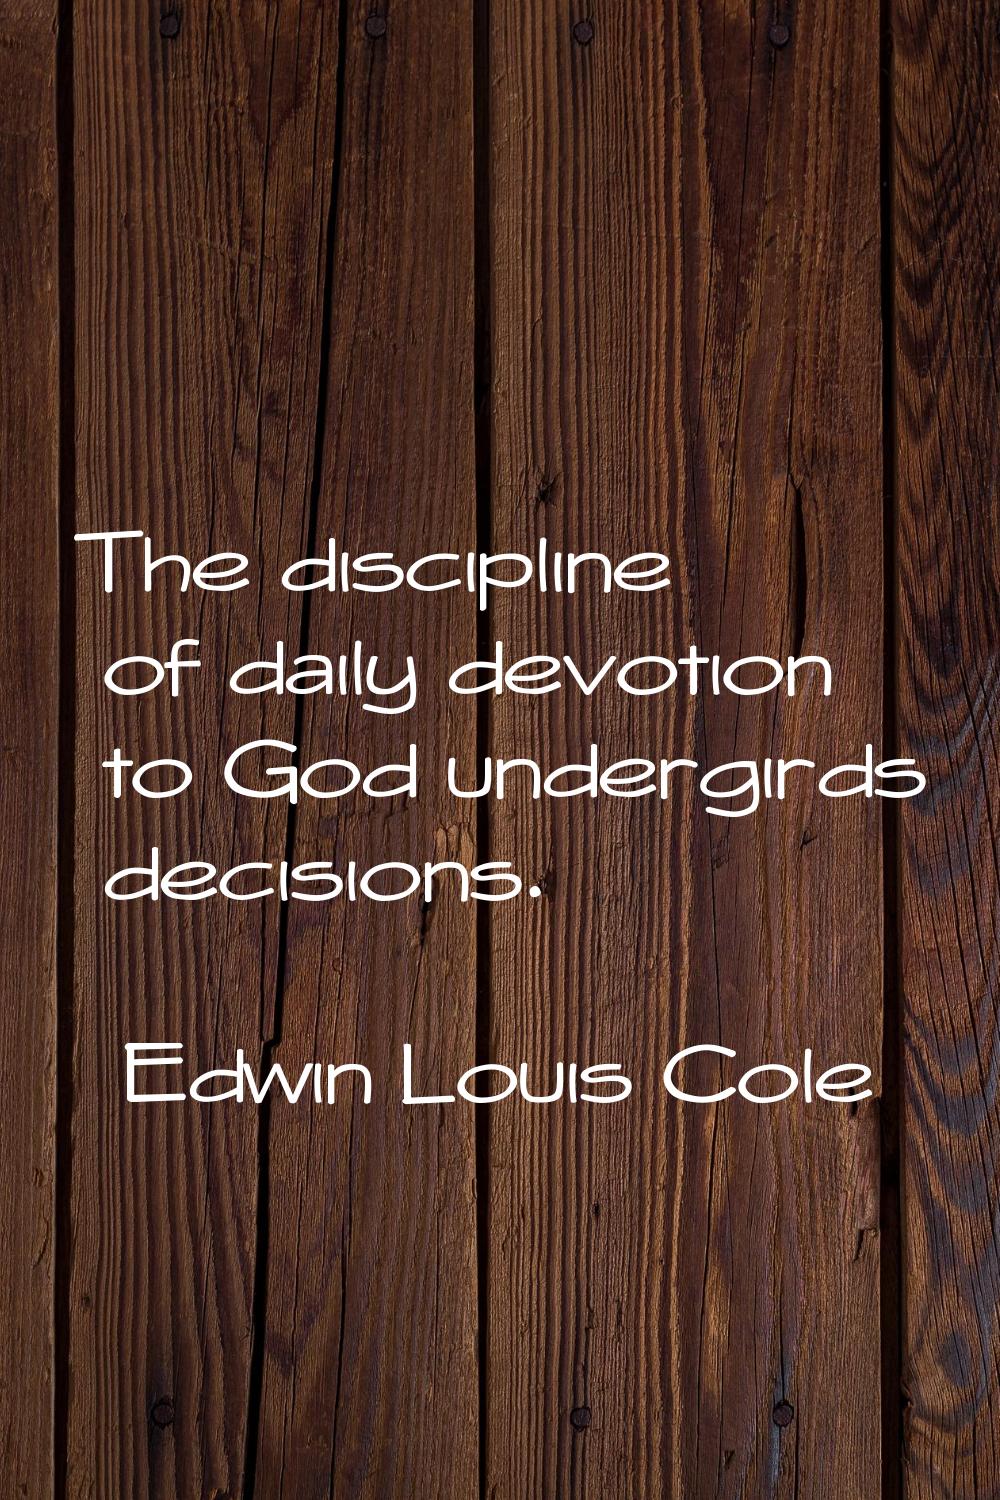 The discipline of daily devotion to God undergirds decisions.